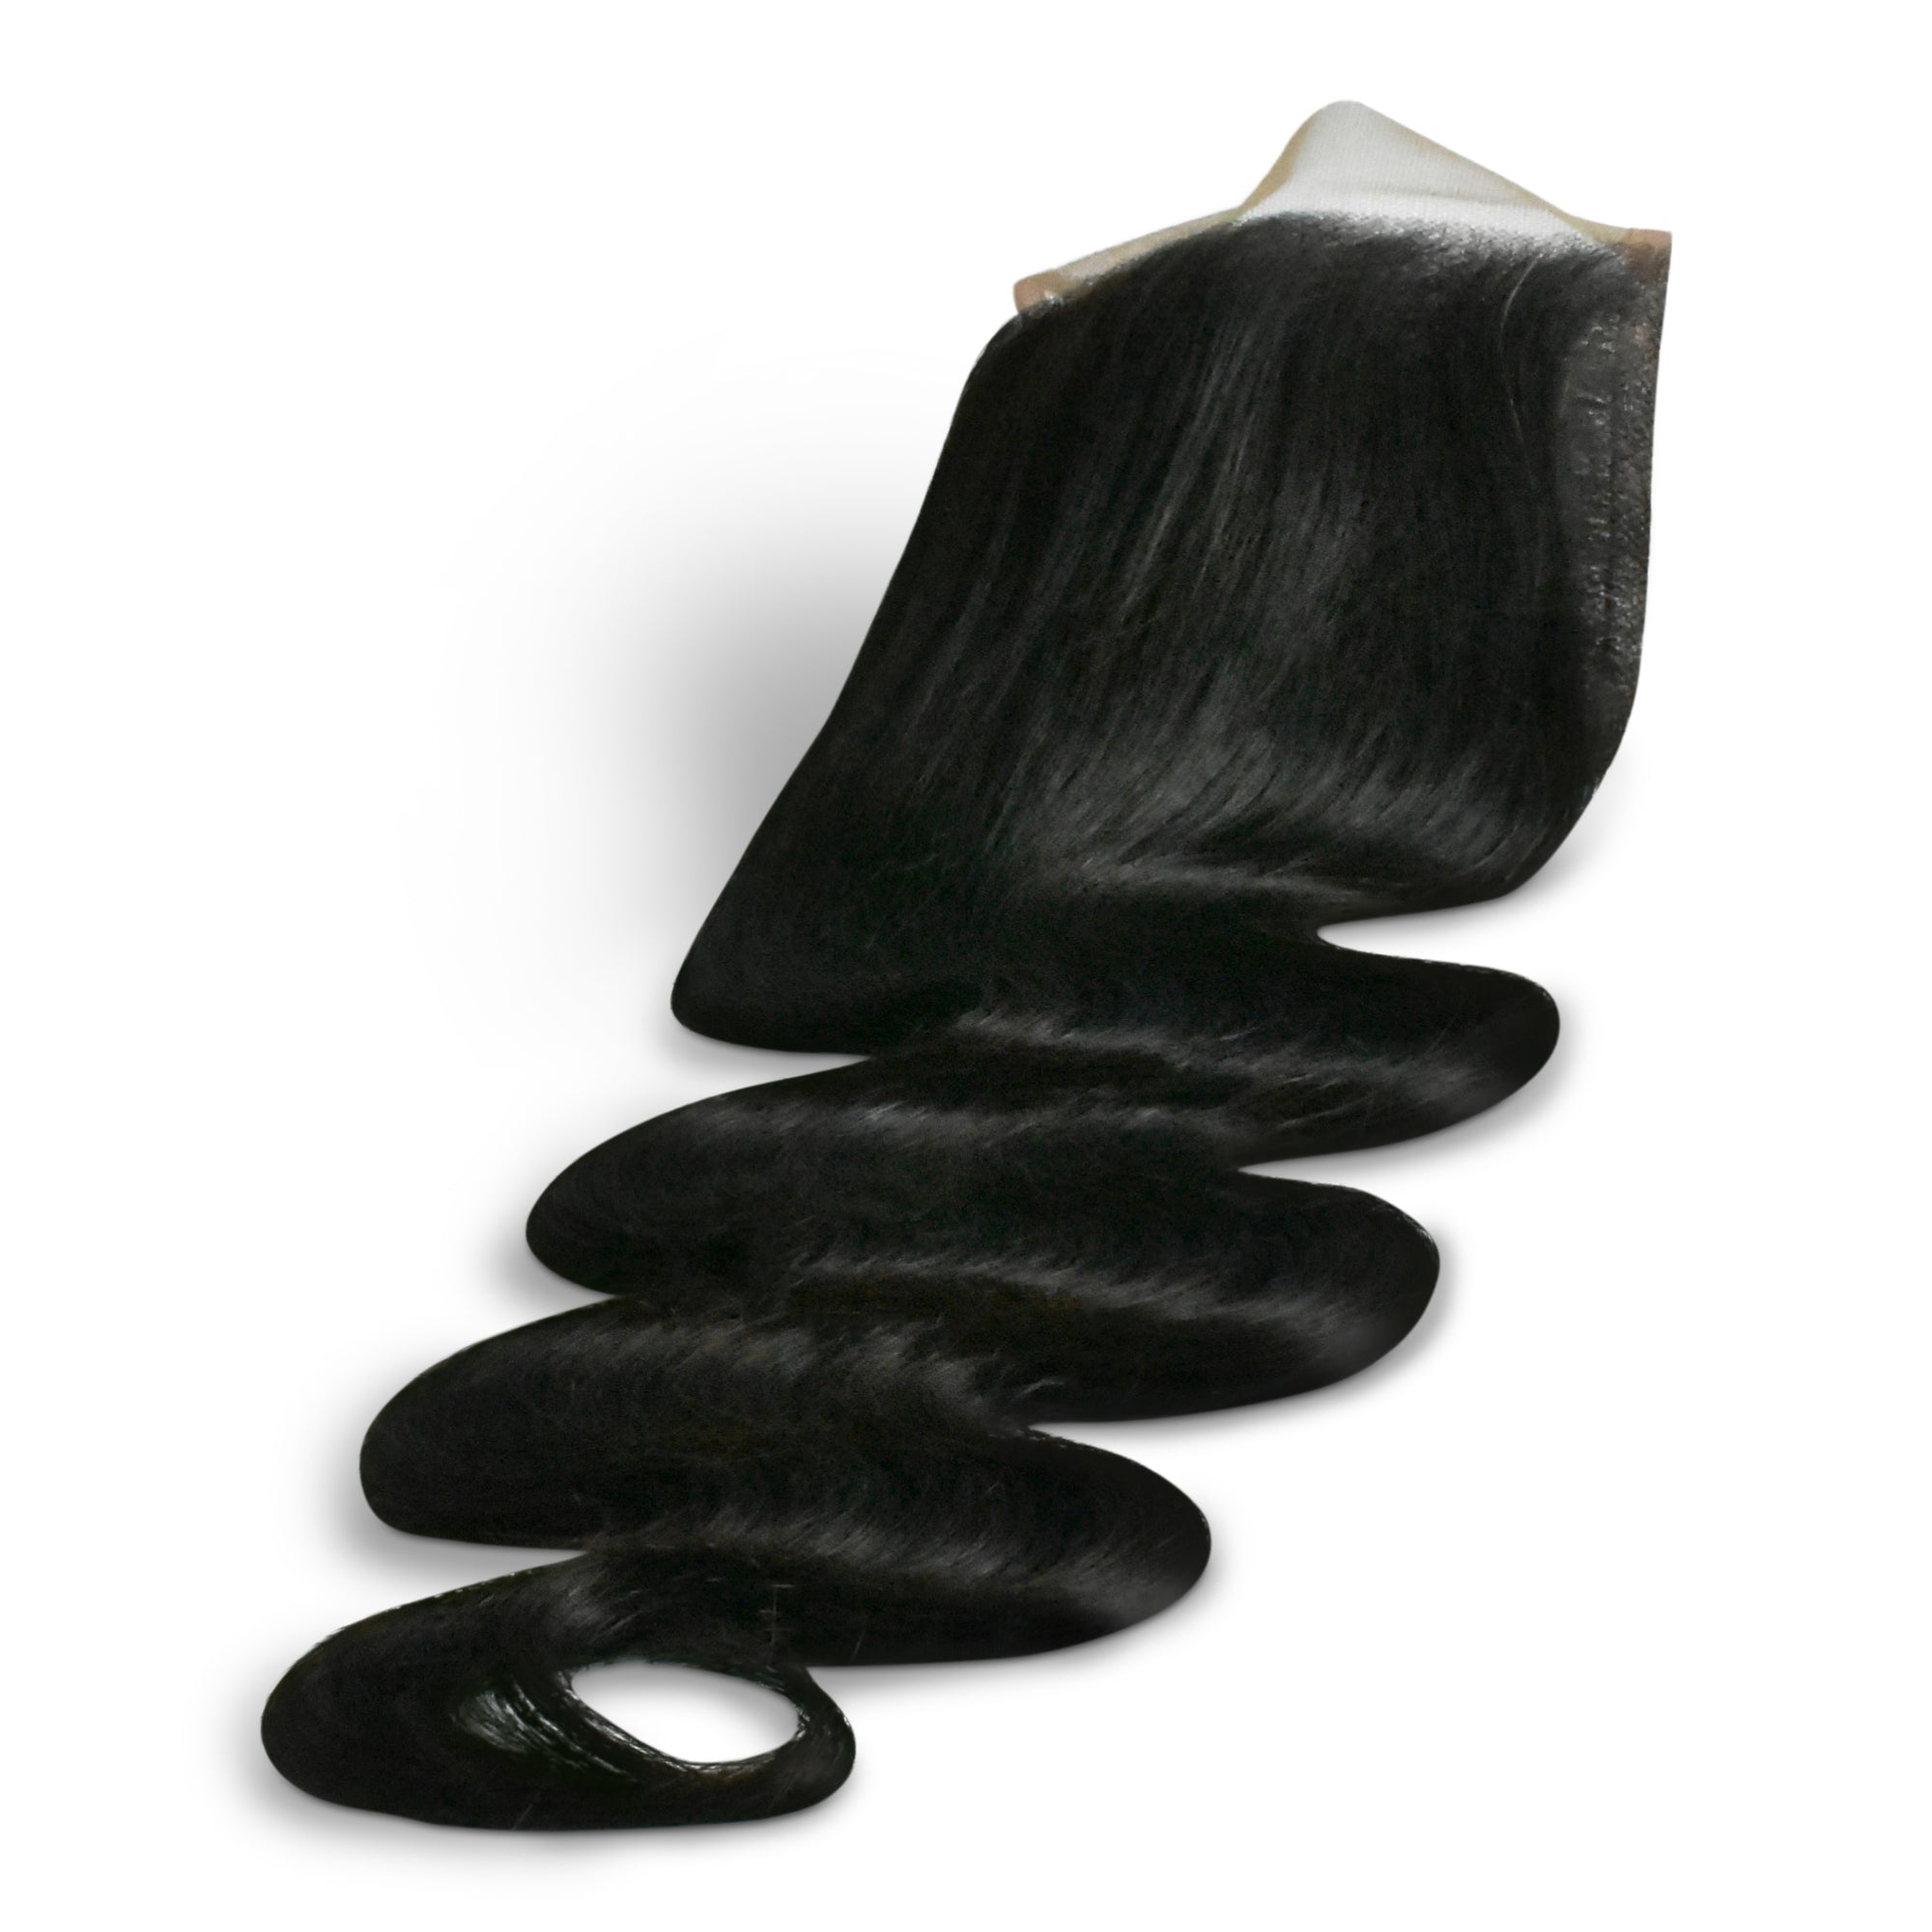 Our body wave closures are made to impress!